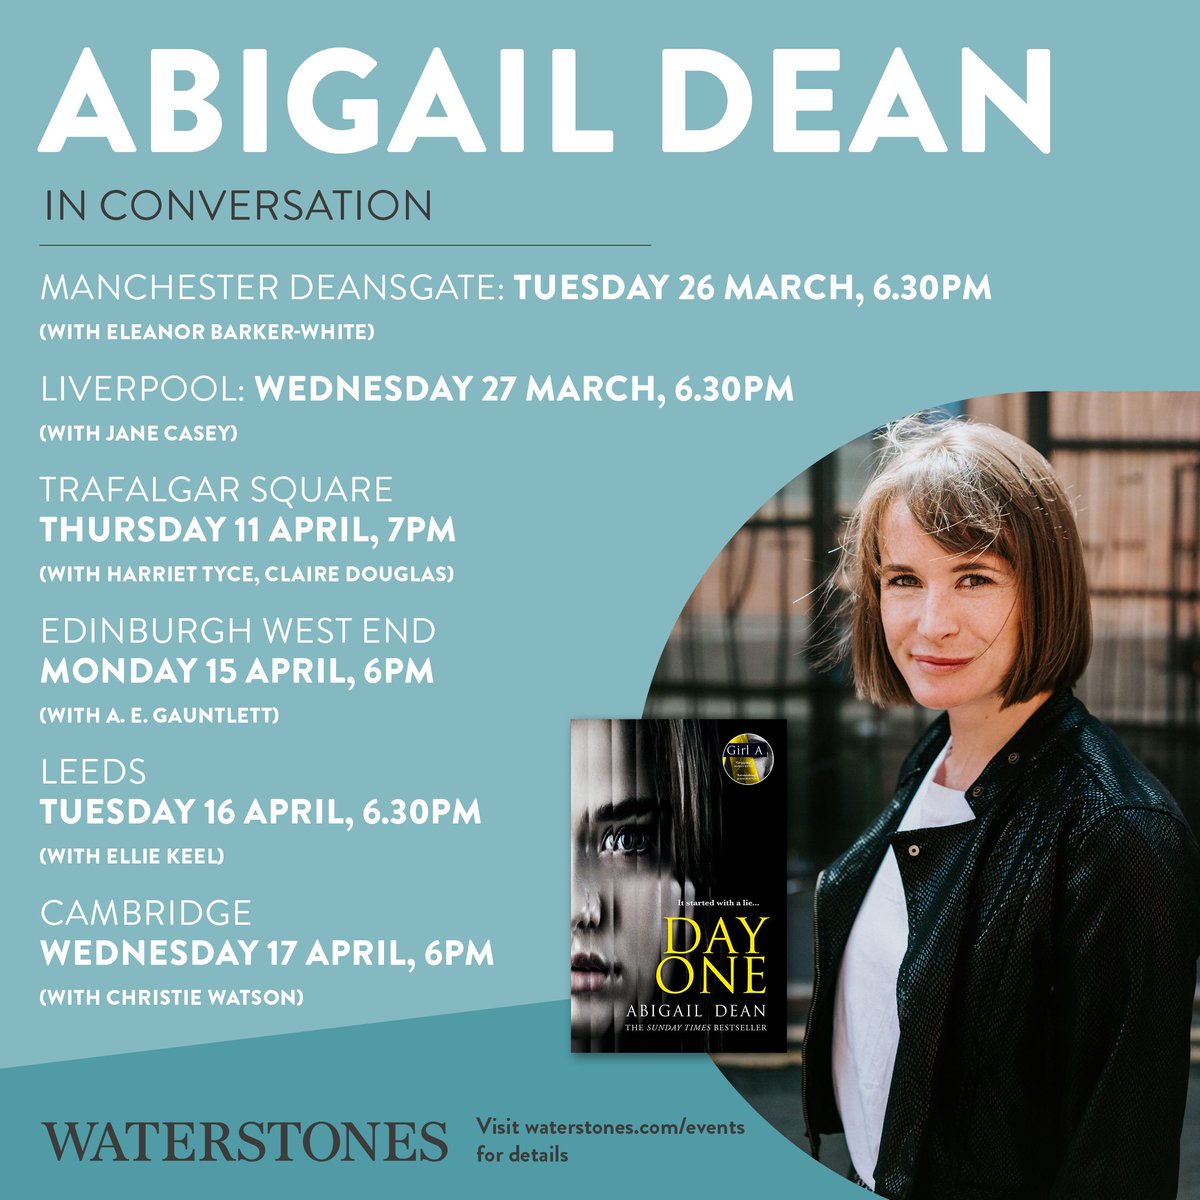 Look who's coming to Cambridge! Authors Abigail Dean and Christie Watson will be in the shop on Wednesday, 17 April. For tickets, visit: waterstones.com/events/an-even…